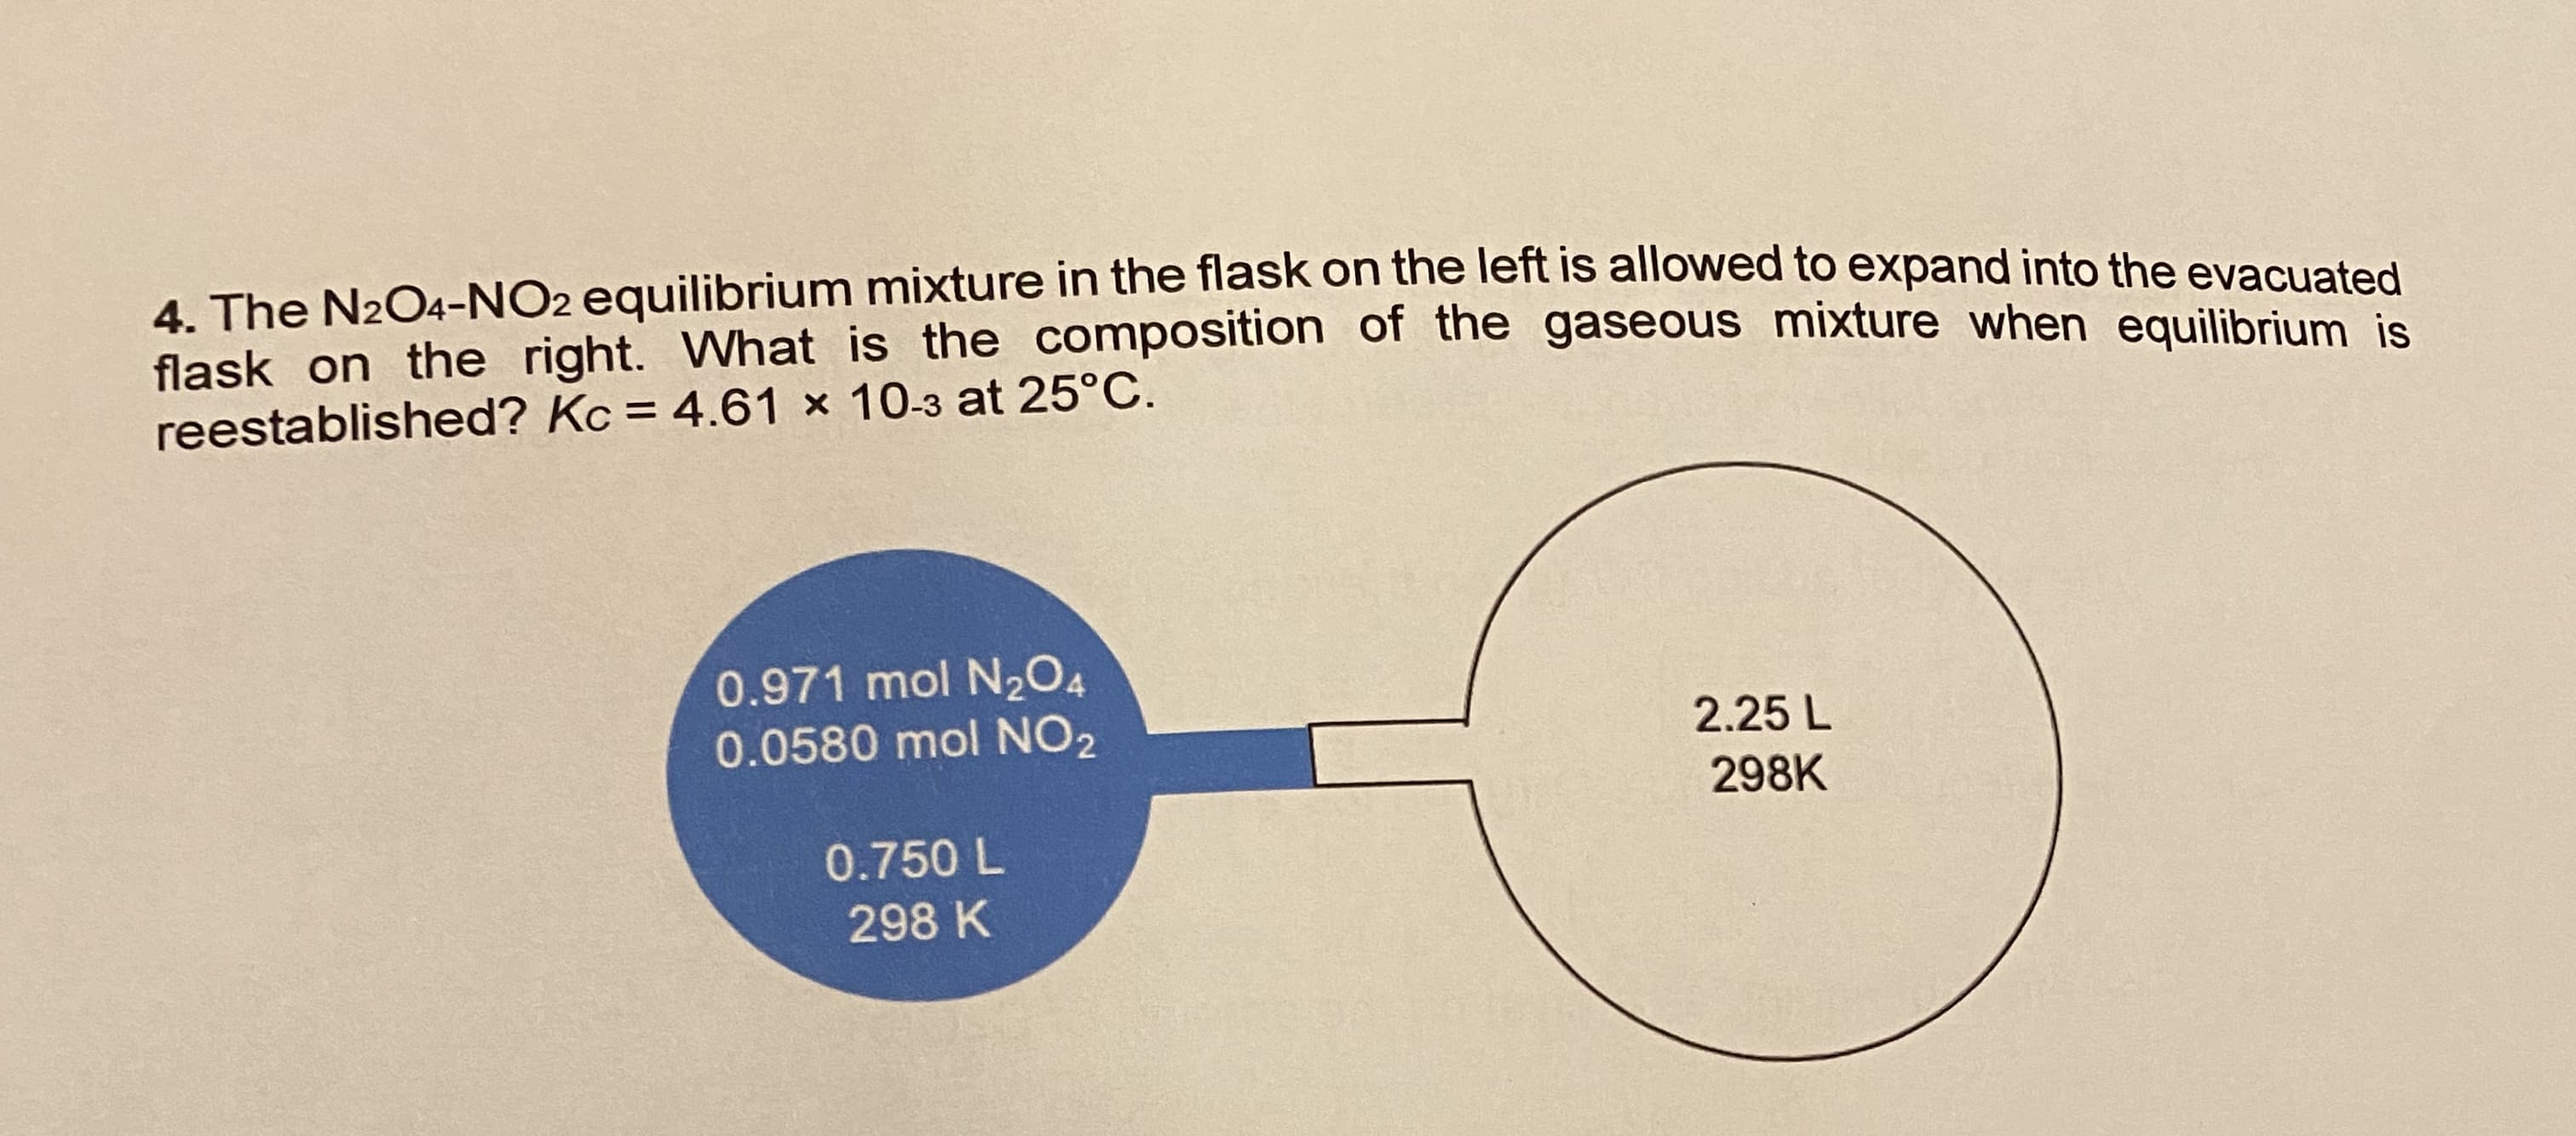 4. The N2O4-NO2 equilibrium mixture in the flask on the left is allowed to expand into the evacualed
flask on the right. What is the composition of the gaseous mixture when equilibrium is
reestablished? Kc = 4.61 x 10-3 at 25°C.
0.971 mol N2O4
0.0580 mol NO2
2.25 L
298K
0.750 L
298 K
